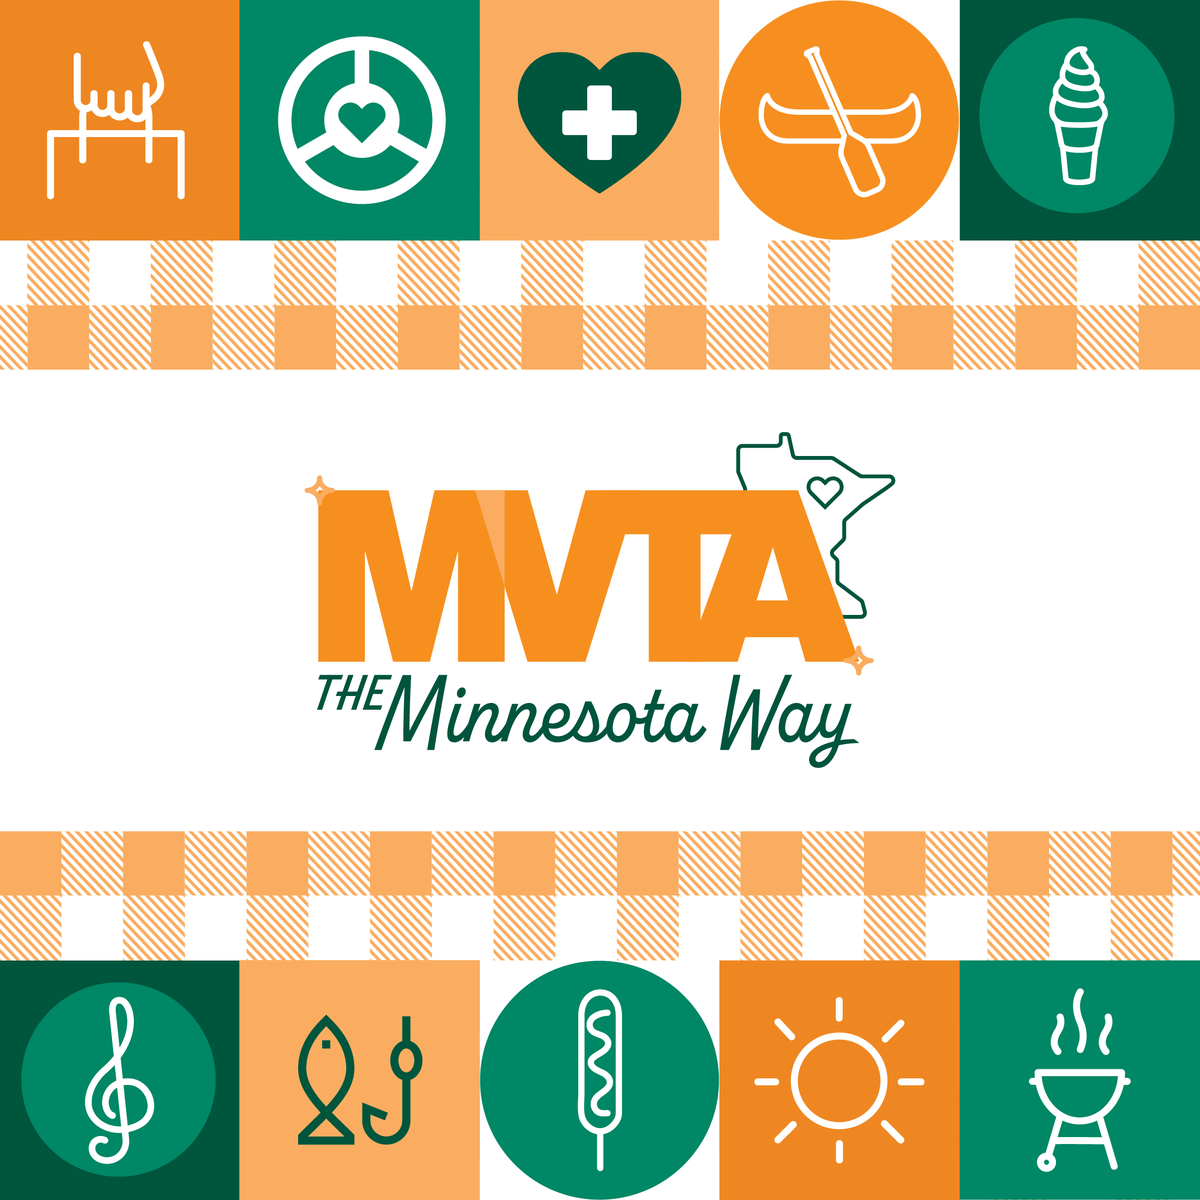 With winter behind us, it’s time for some warm weather fun, Minnesota style! This summer, take a moment to step aboard, relax, and cool off on our Minnesota Way bus at local events around the area. See where we’ll be making our next stop at https://t.co/DmHJkWIlH5 https://t.co/61Mq57y9in